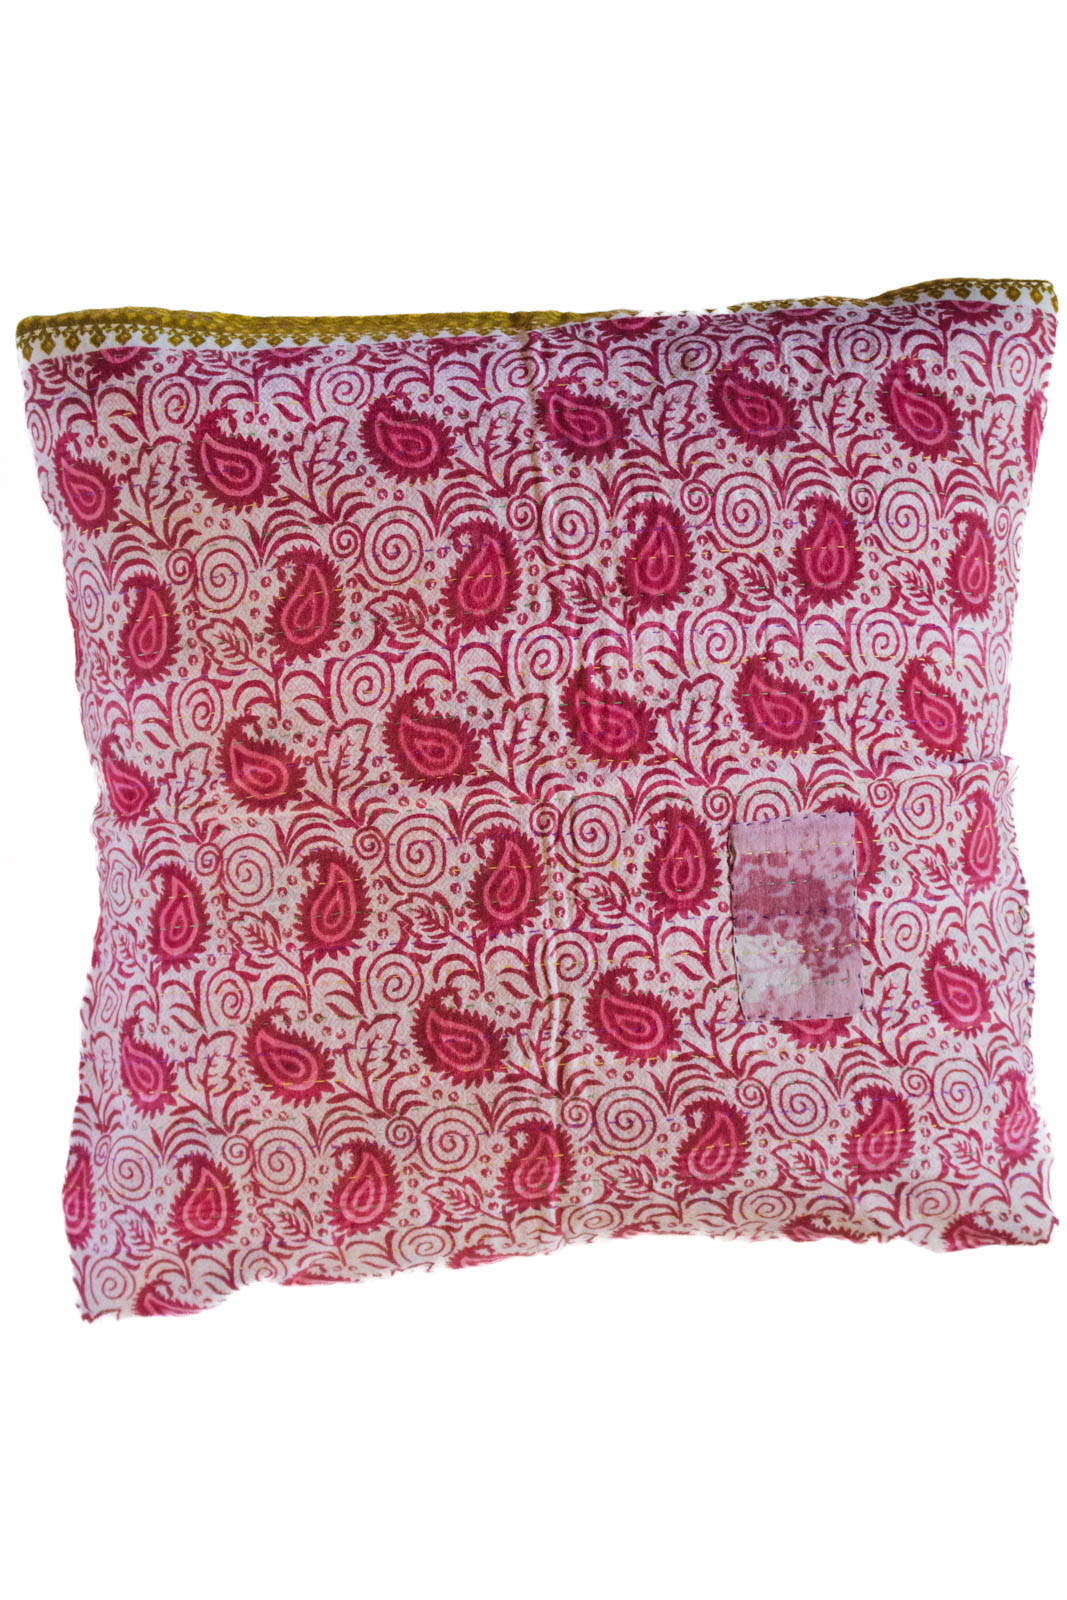 Worthy no. 5 Kantha Pillow Cover